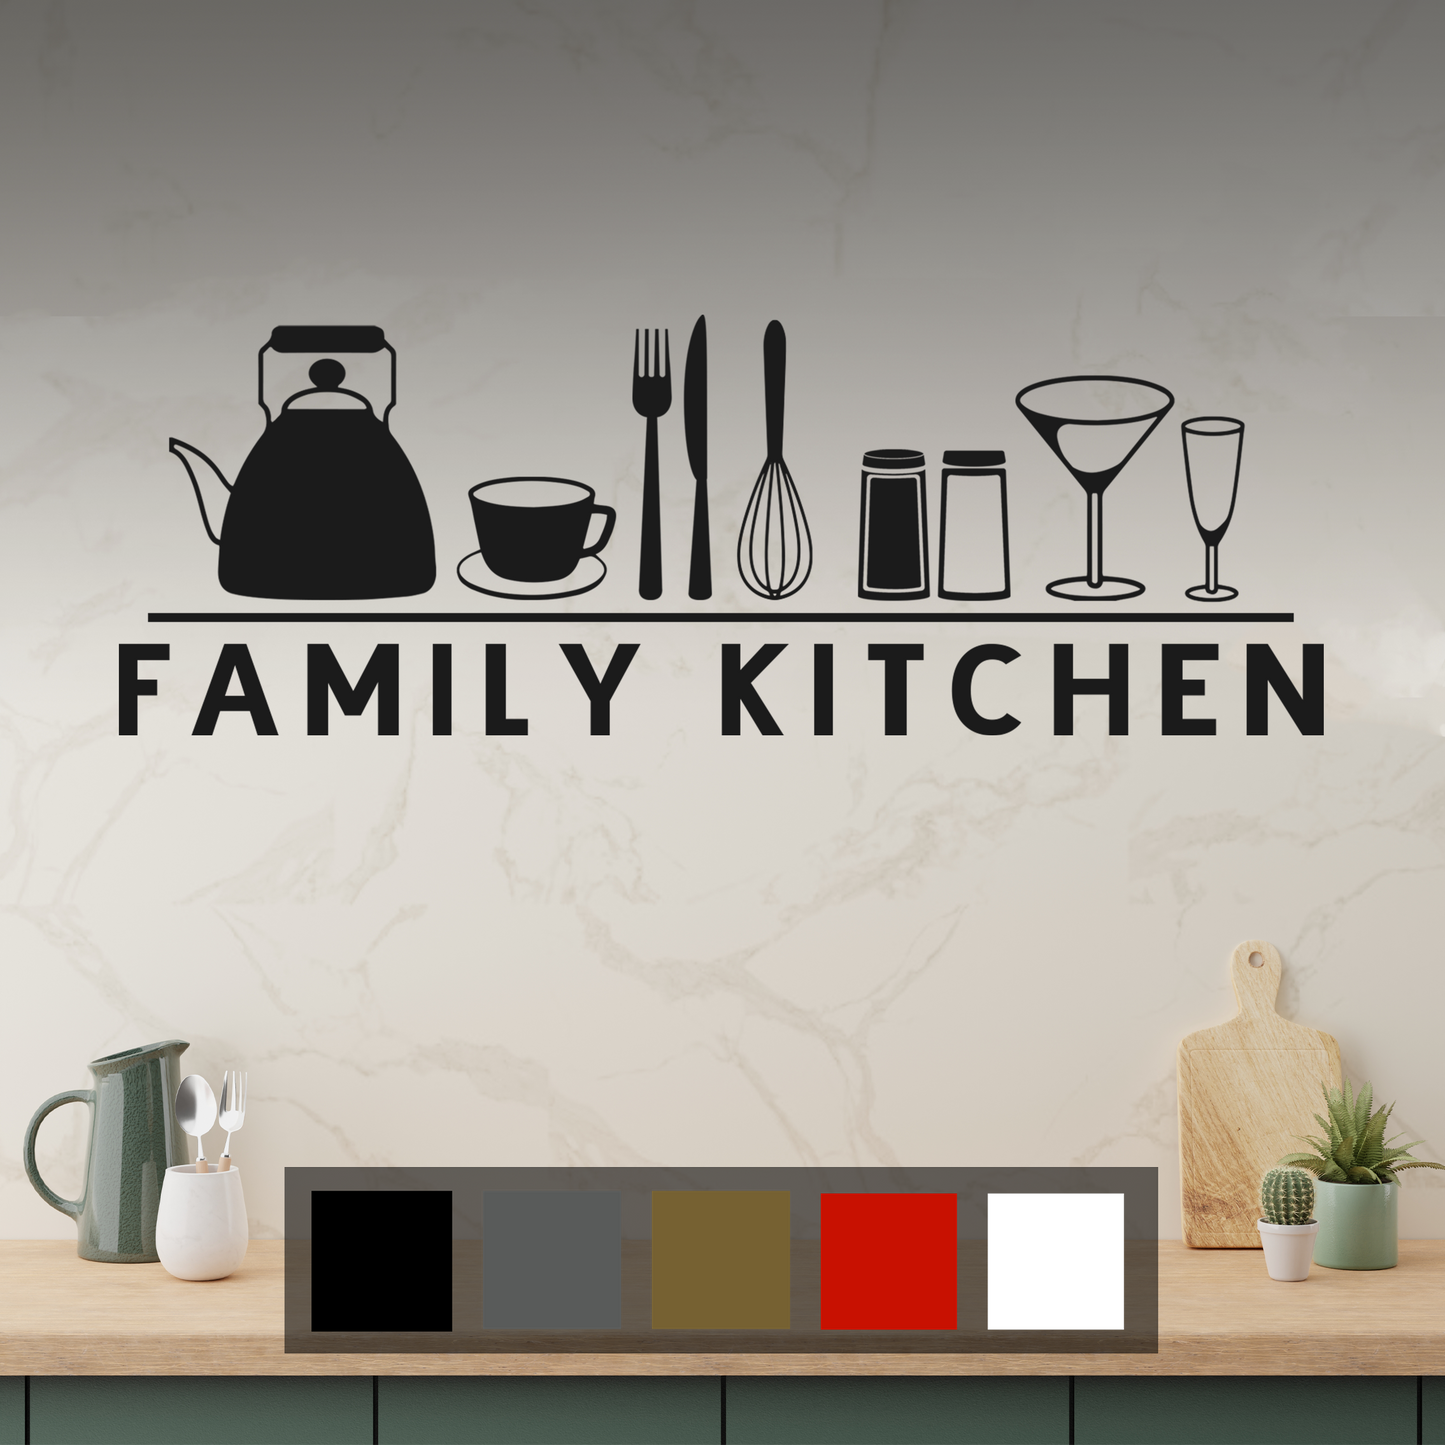 Family Kitchen Wall Sticker Decal